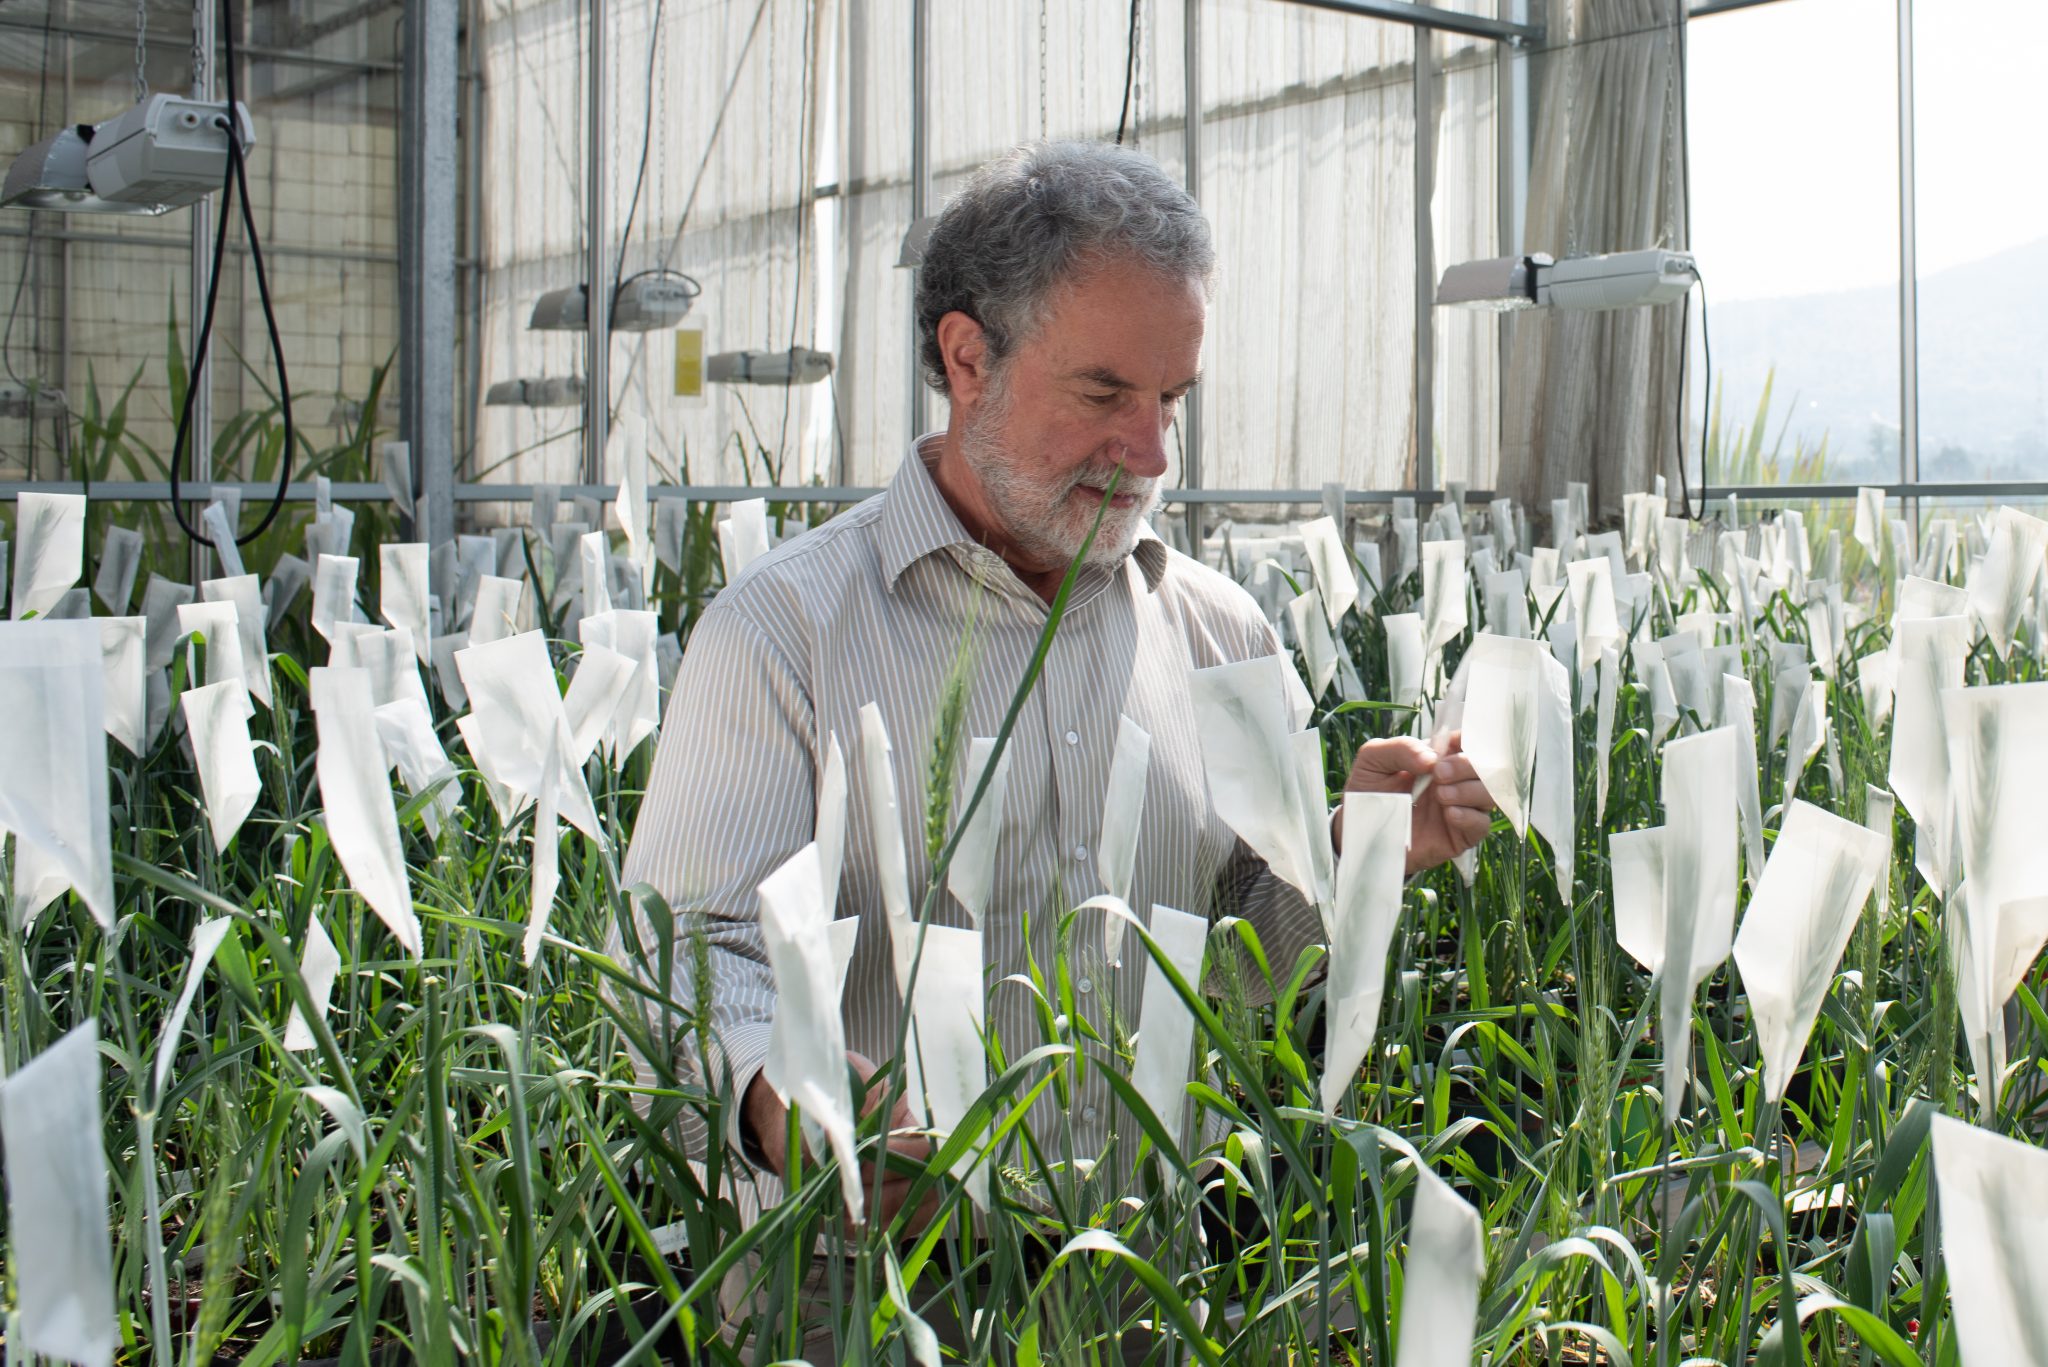 Hans Braun, Director of the Global Wheat Program at the International Maize and Wheat Improvement Center (CIMMYT), inspects wheat plants in the greenhouses. (Photo: Alfonso Cortés/CIMMYT)